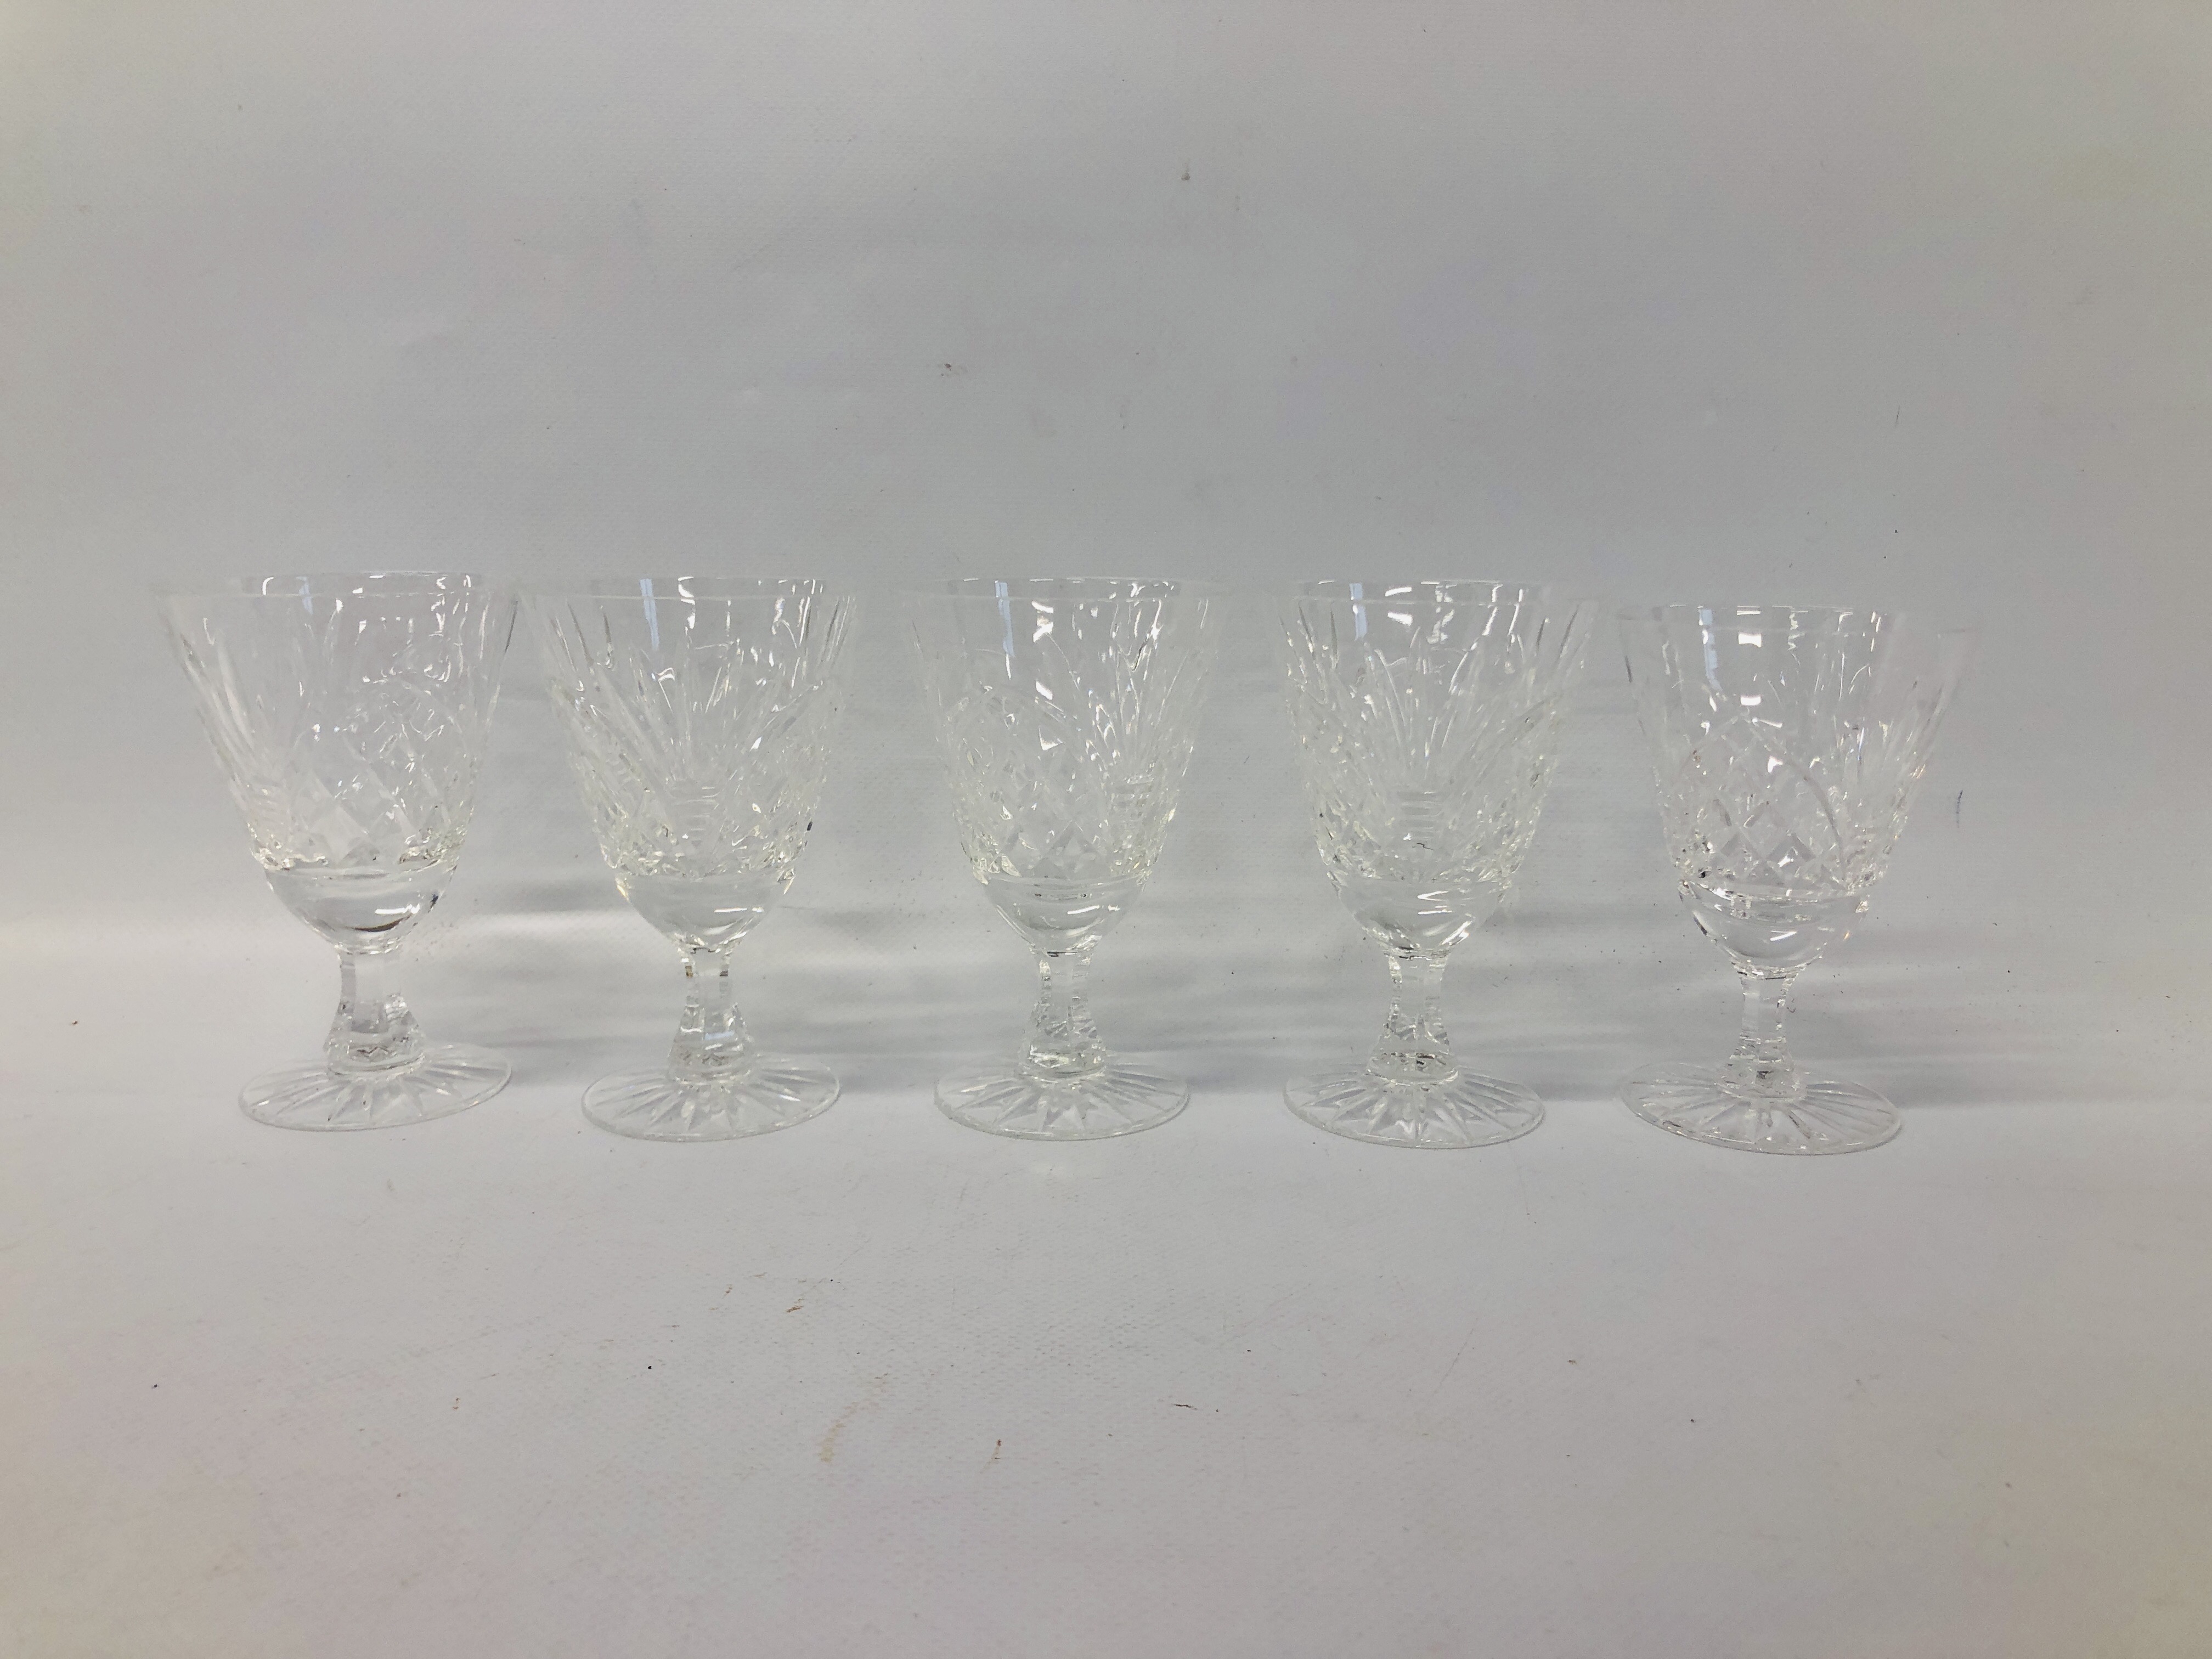 COLLECTION OF GOOD QUALITY CUT GLASS CRYSTAL DRINKING VESSELS ALONG WITH A SET OF 4 HAND PAINTED - Image 8 of 11